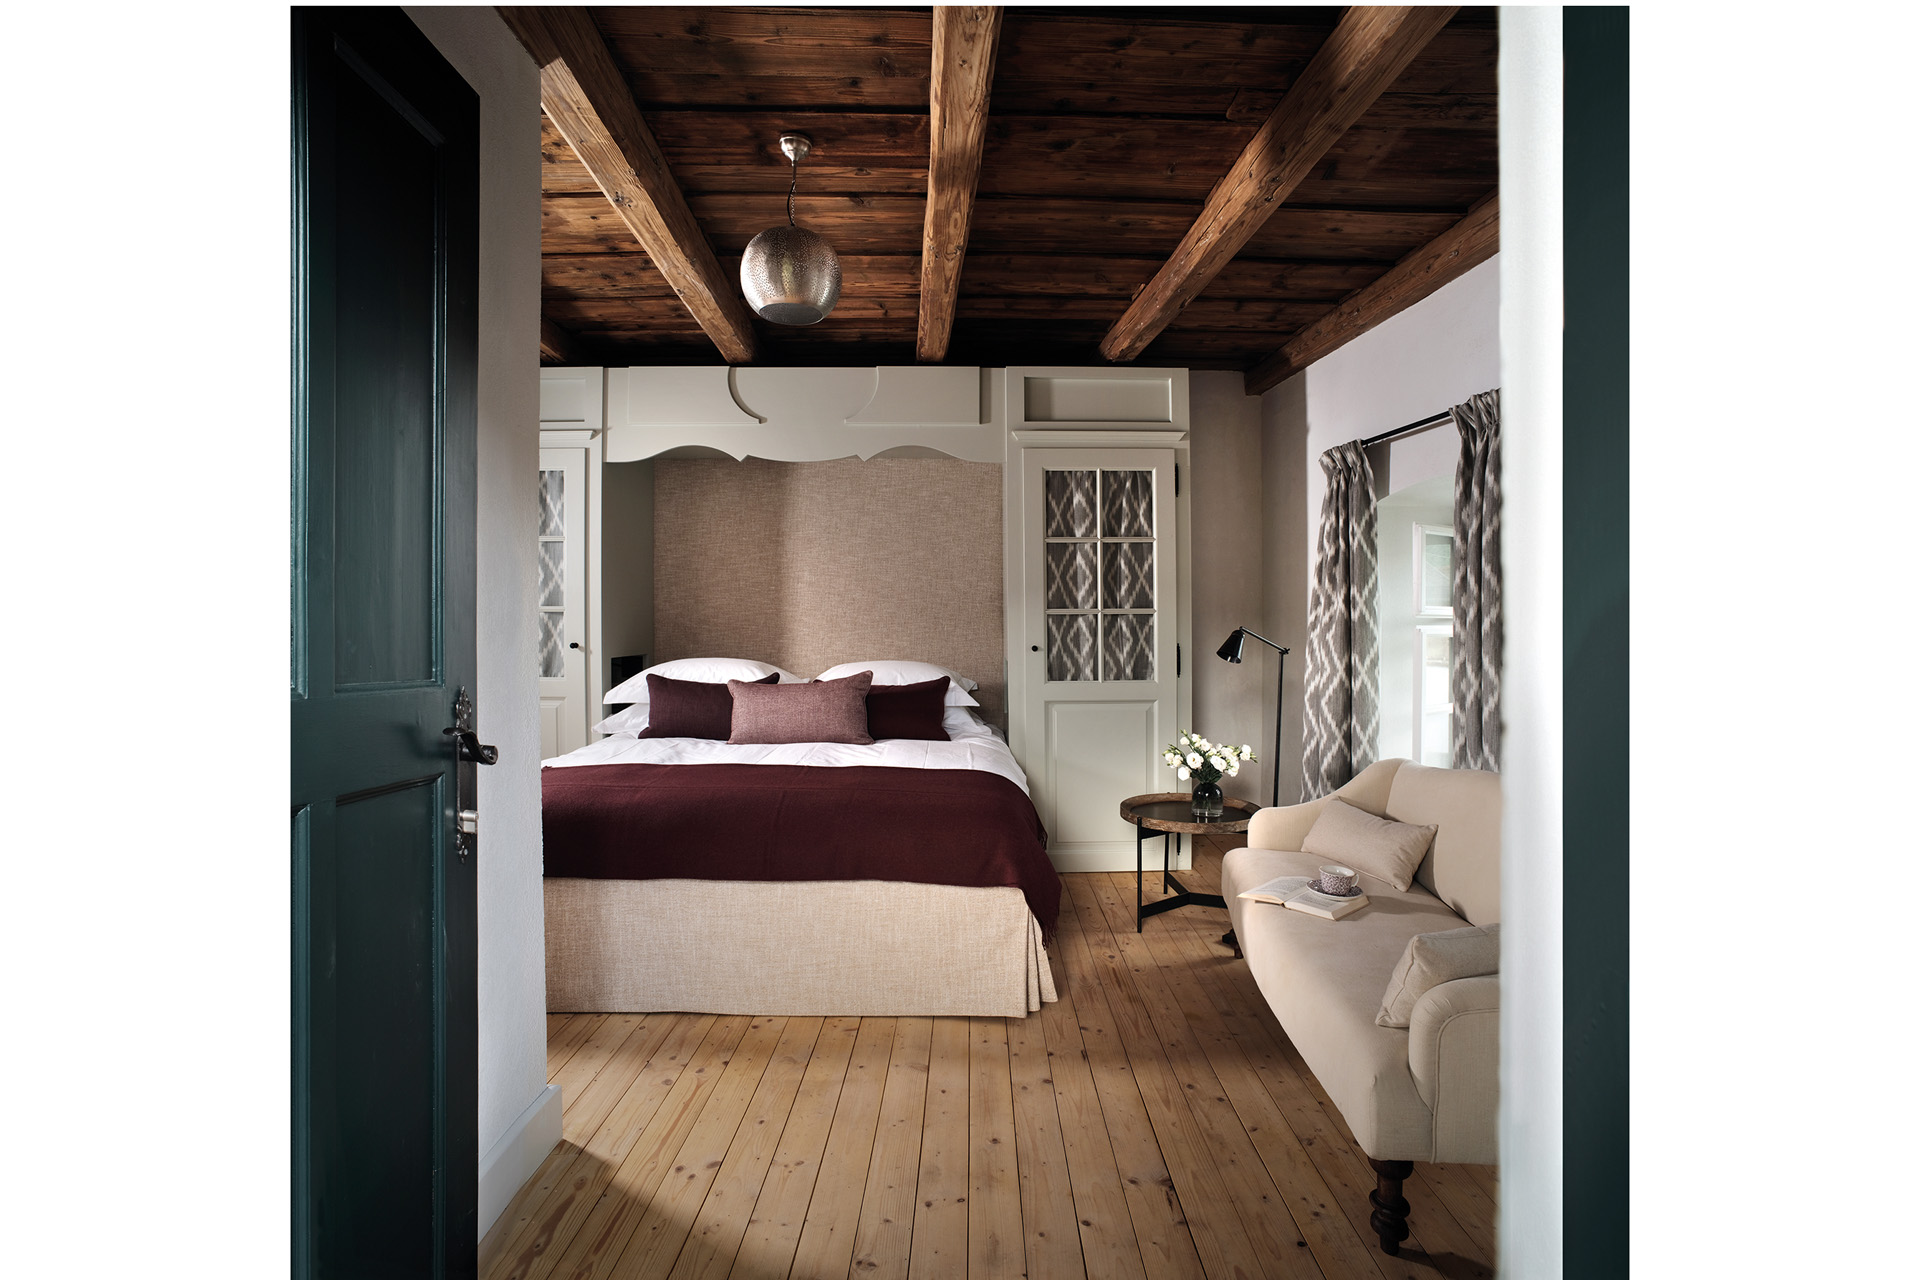 A neutral bedroom with wood beam ceiling